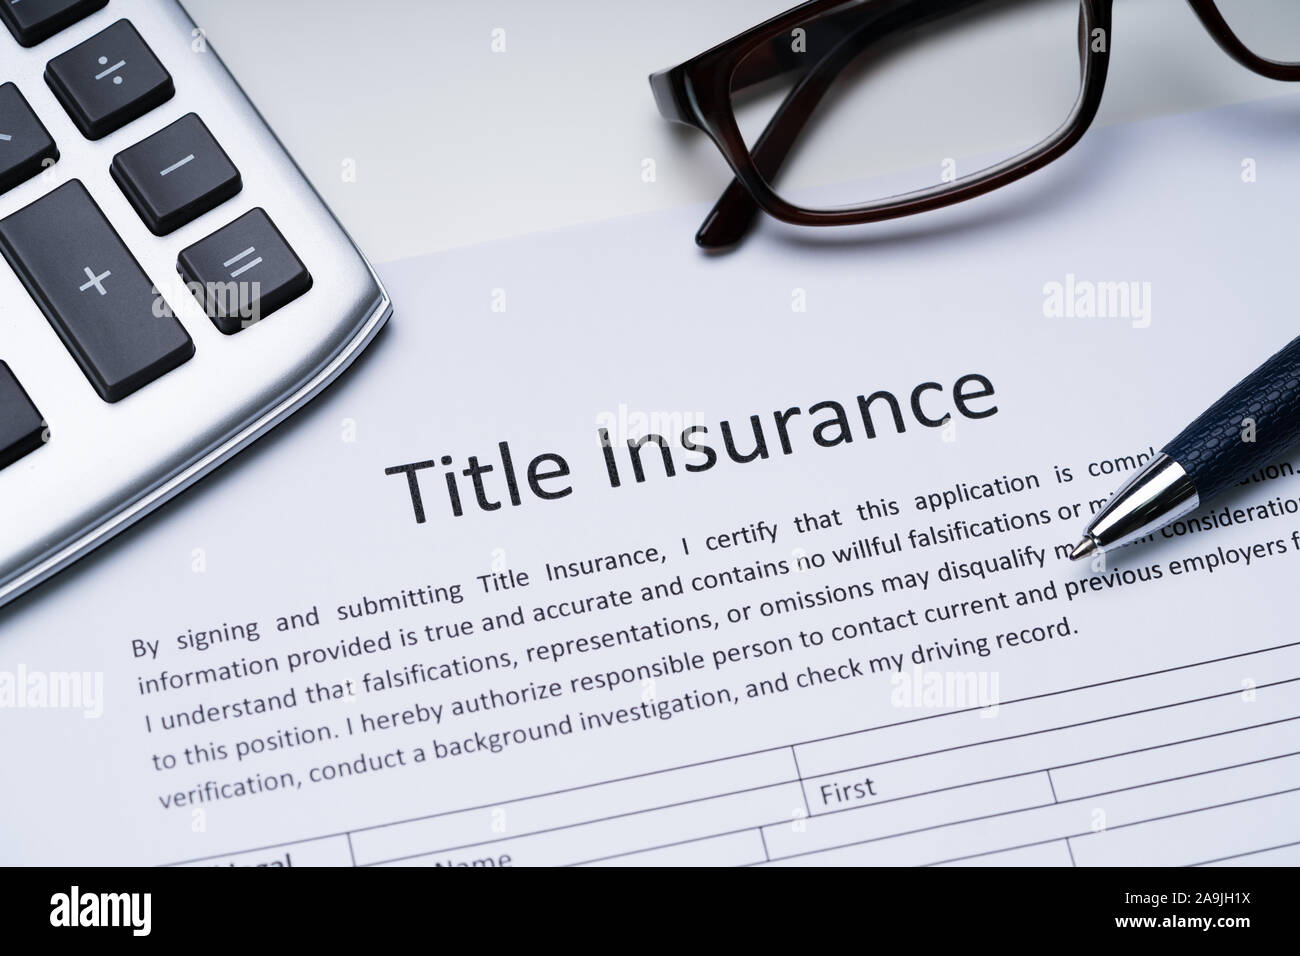 Title Insurance Form Near Calculator And Glasses Stock Photo